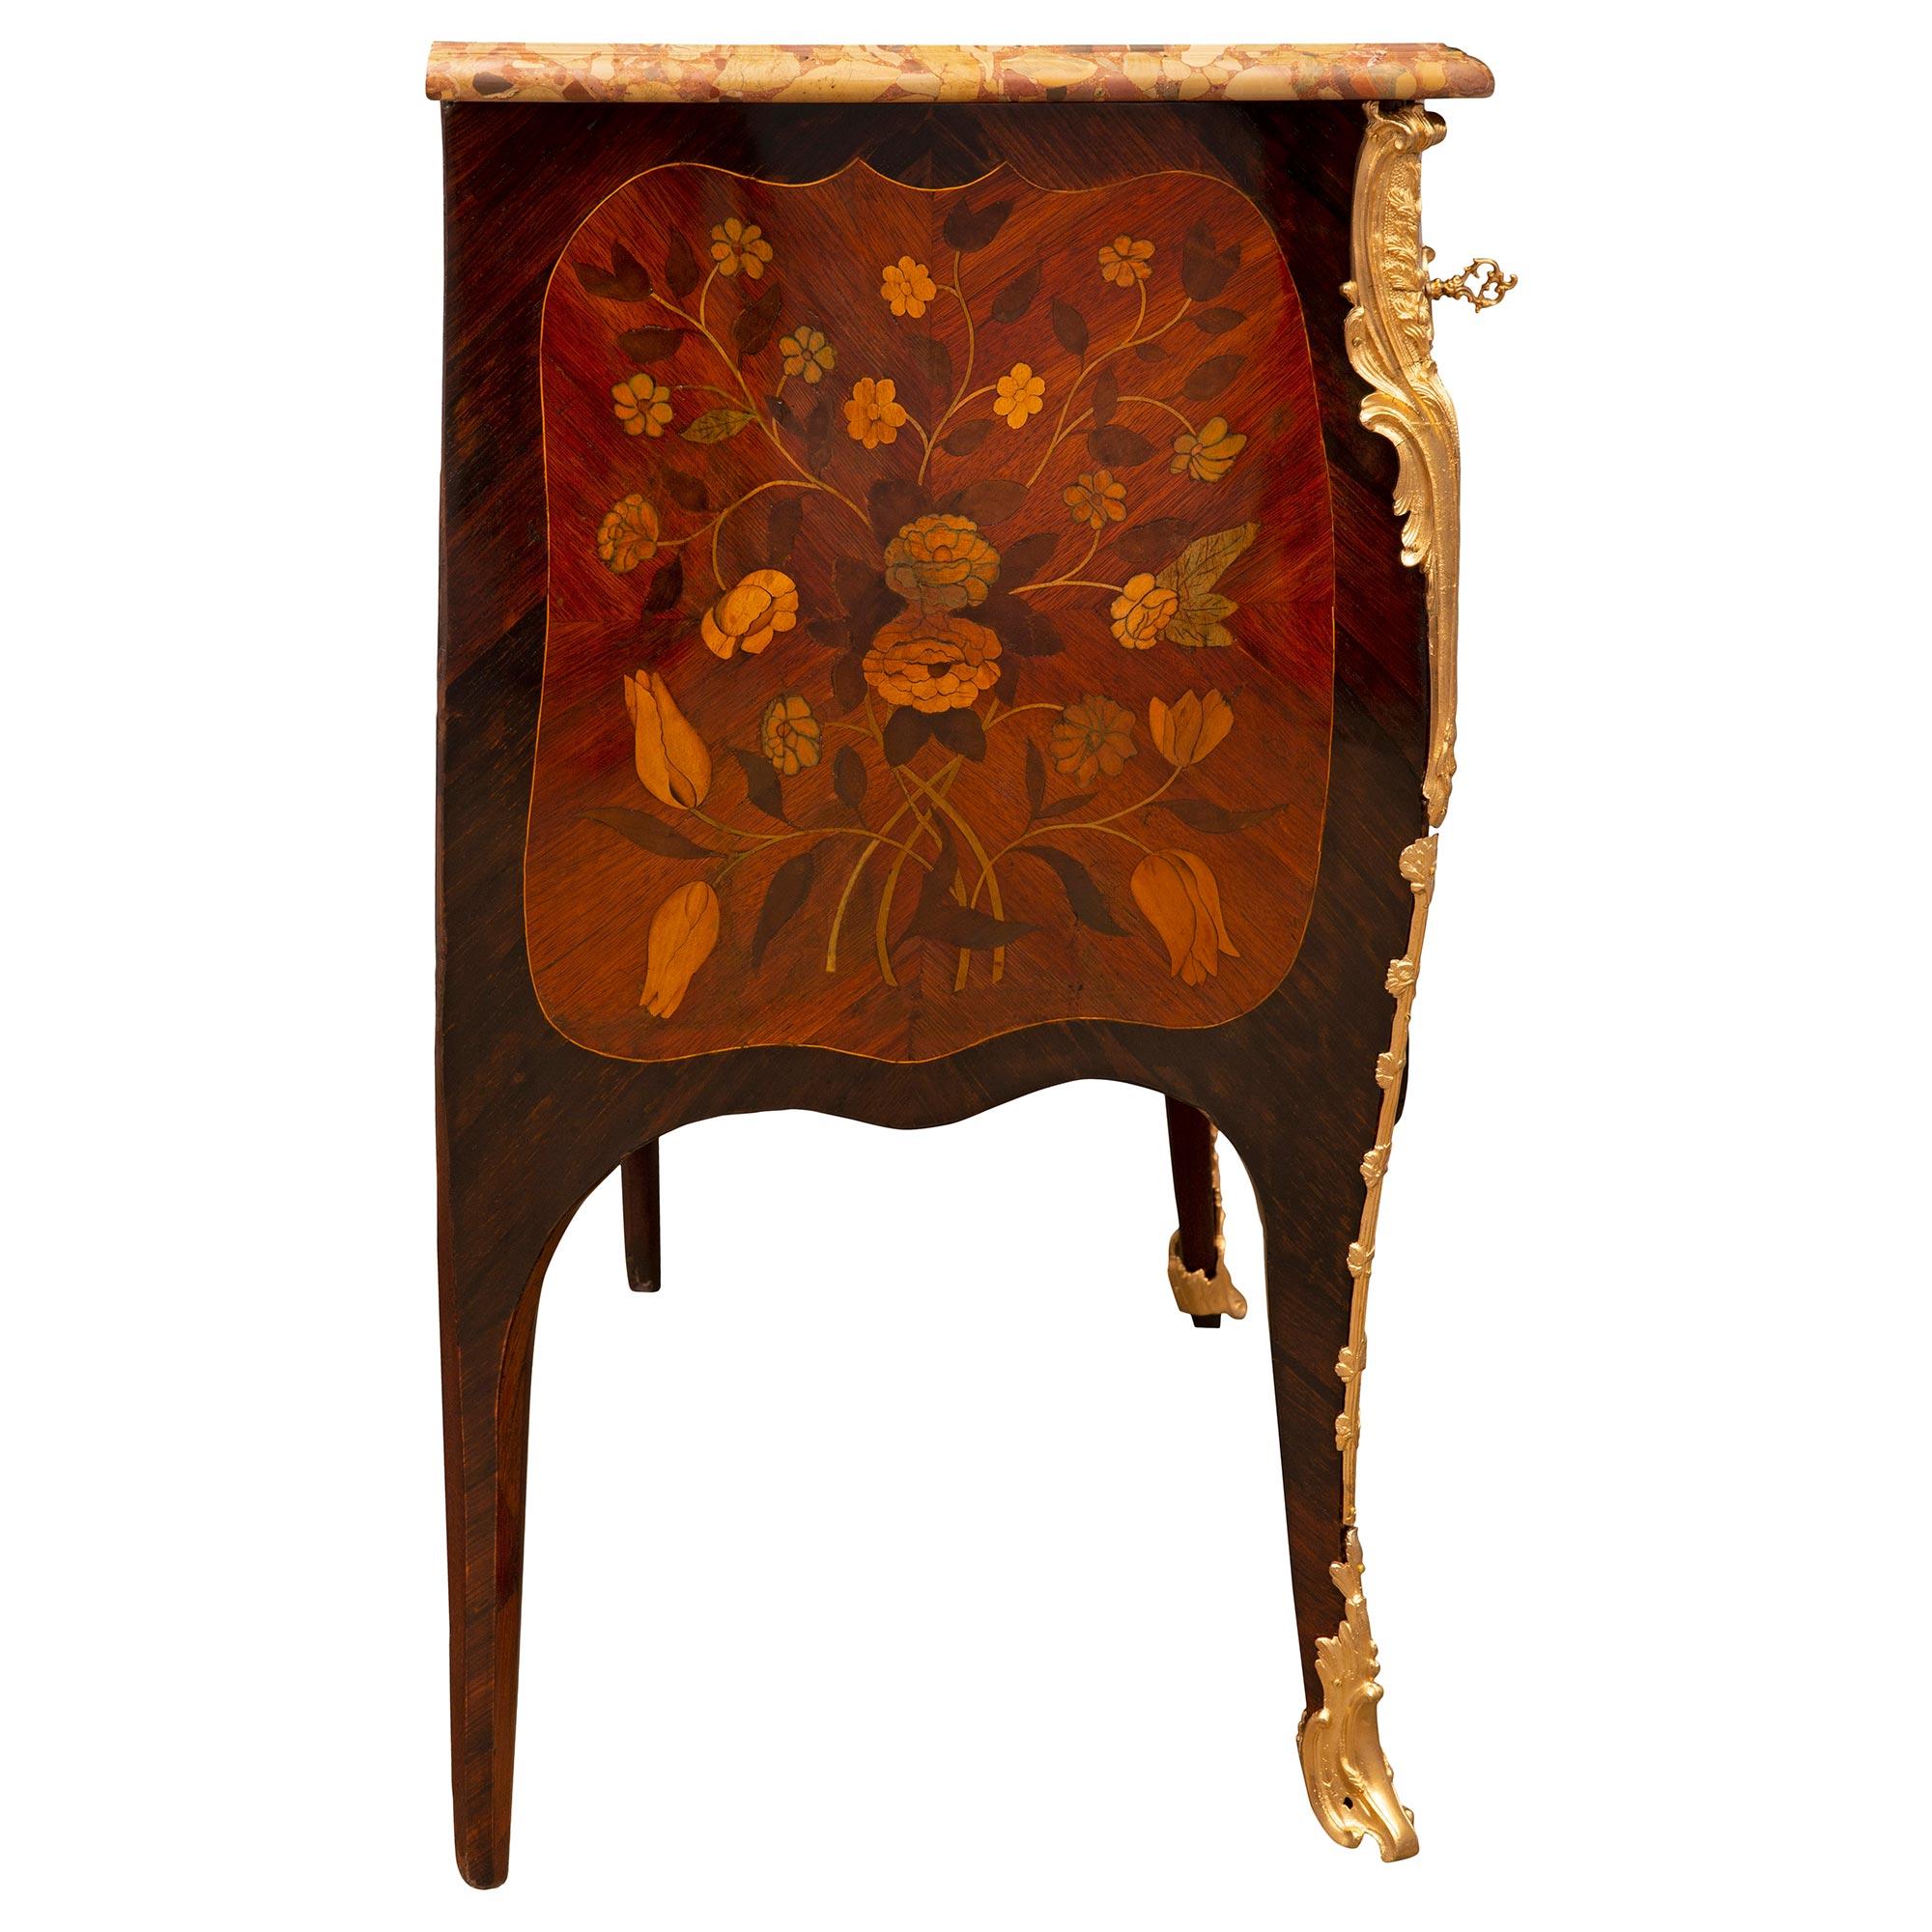 Ormolu French 18th Century Louis XV Period Rosewood And Brèche D’Alep Marble Commode For Sale